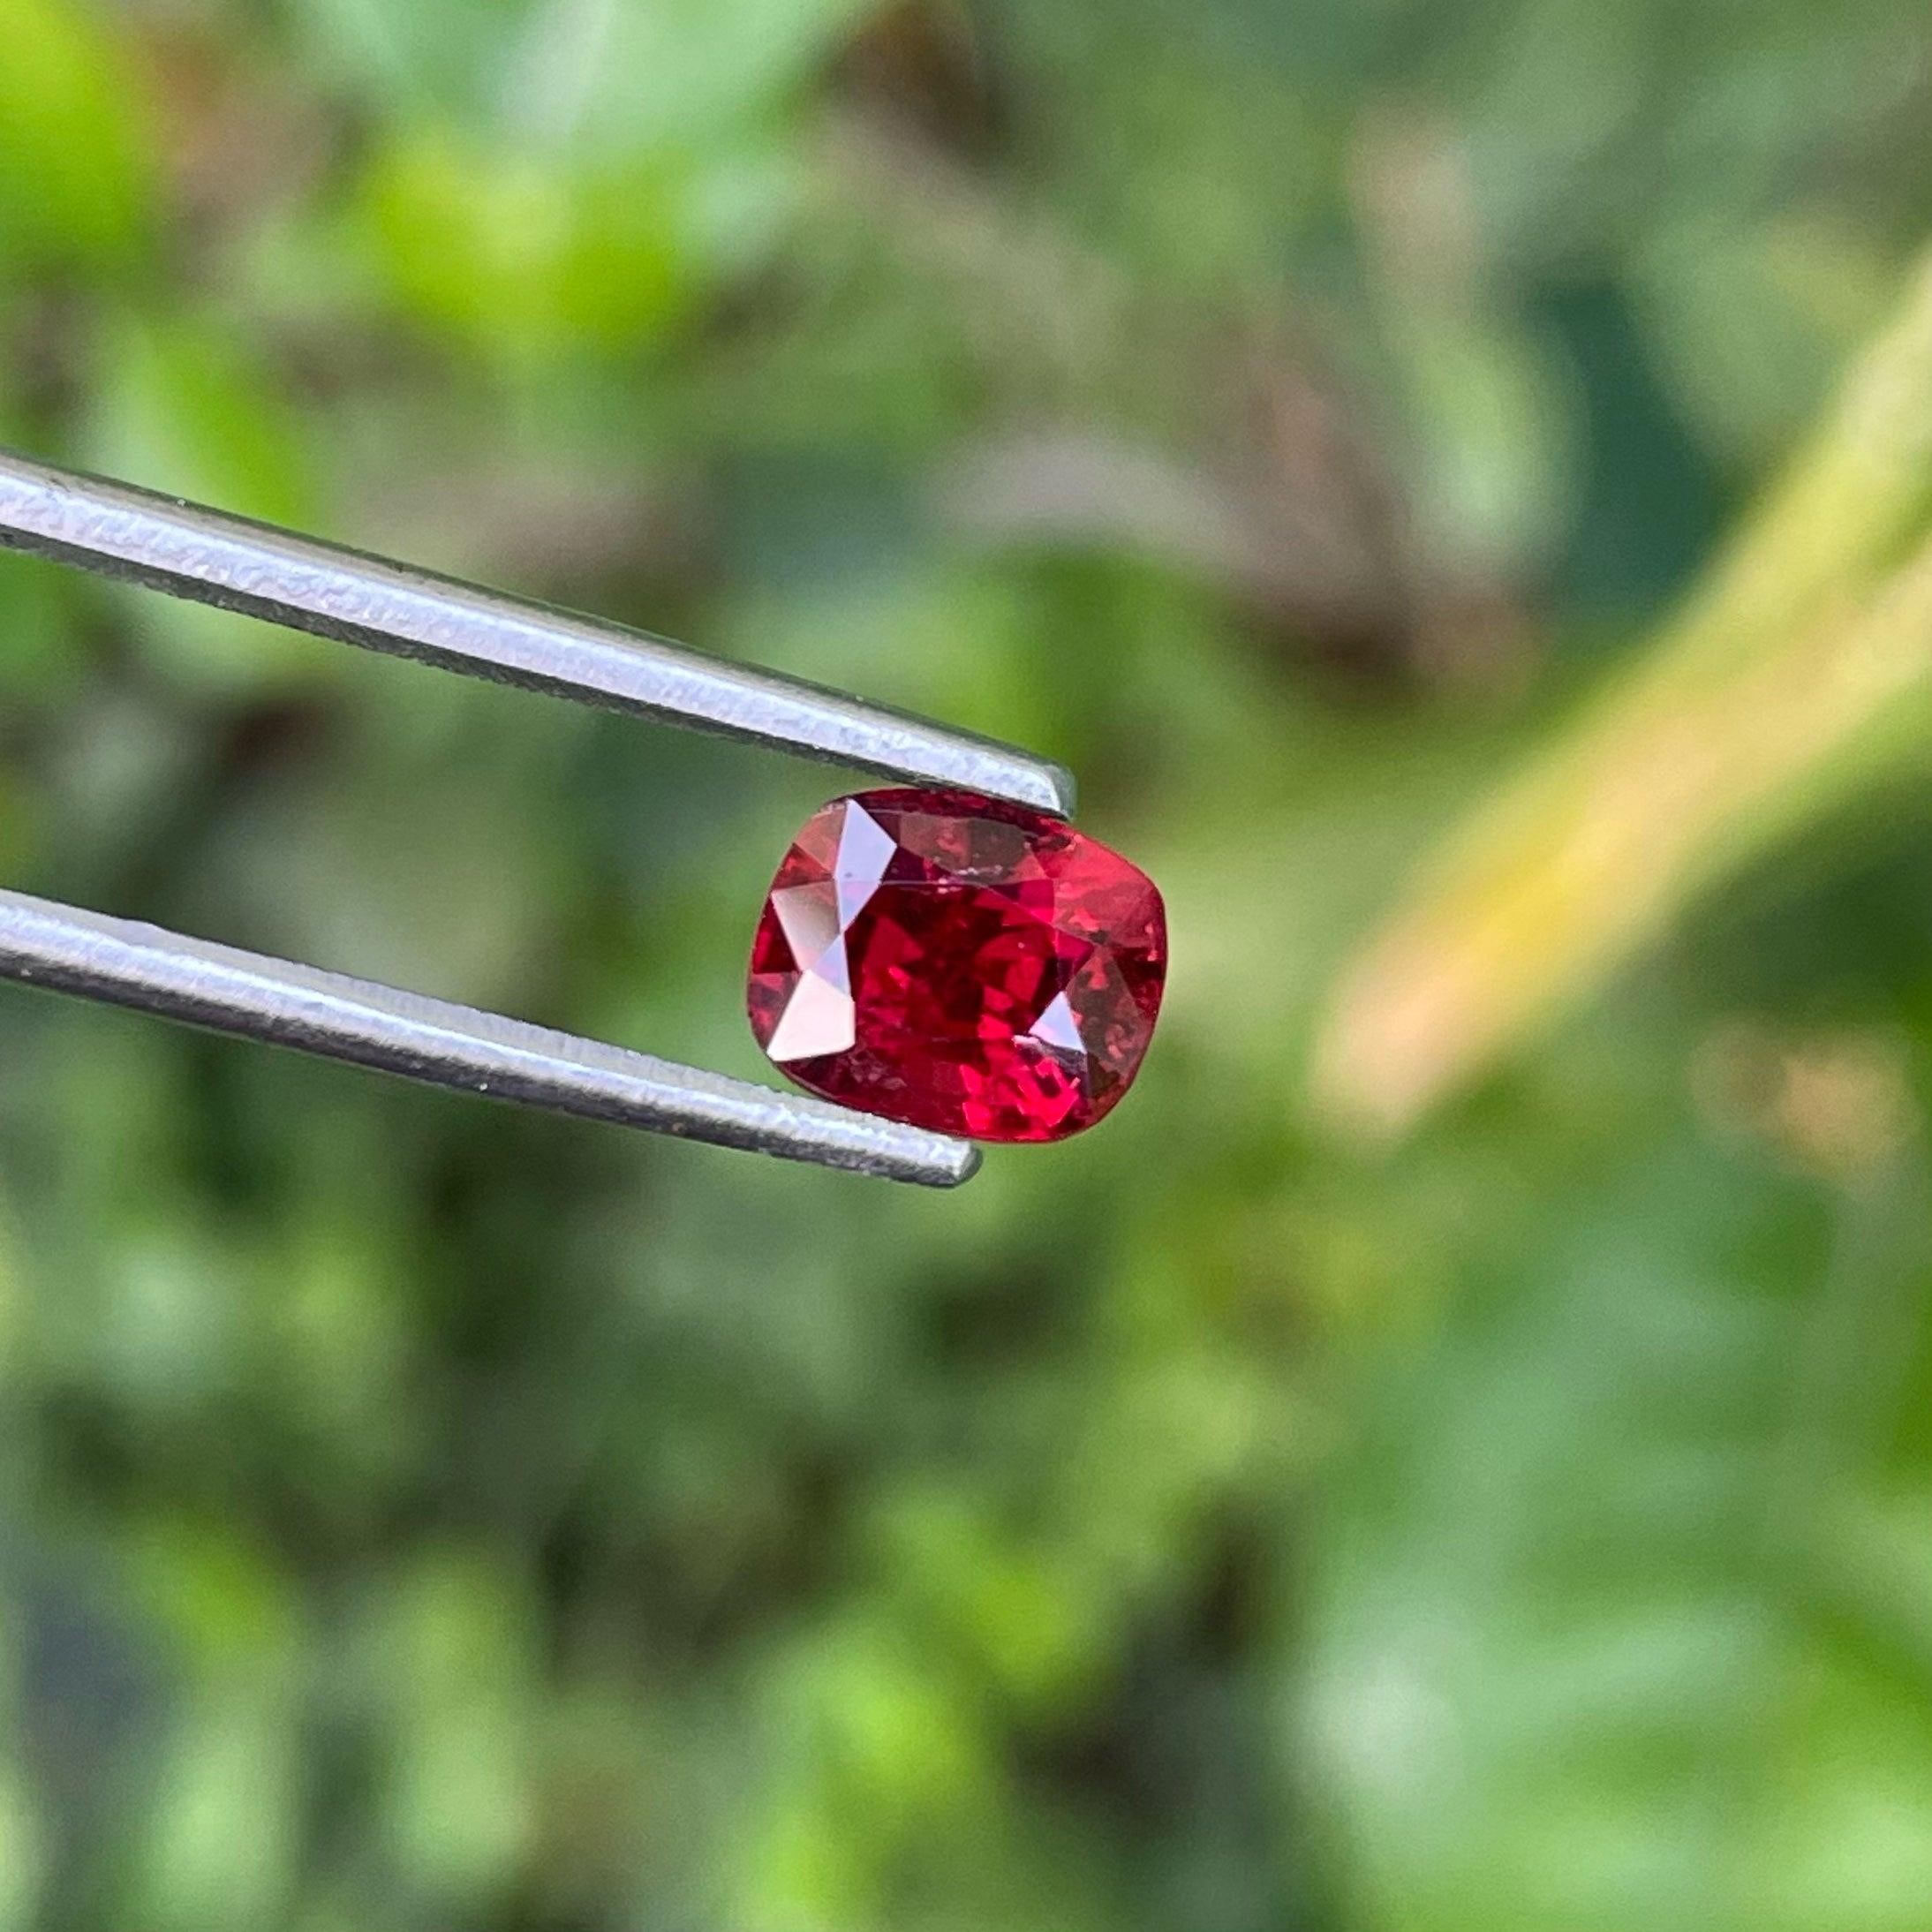 Shiny Red Spinel Stone, available for sale at wholesale price, cushion-cut,1.17 carats, natural high quality, Loose Spinel stone From Burma.

Prodcut Information:
GEMSTONE TYPE	Shiny Red Spinel Stone
WEIGHT	1.17 carats
DIMENSIONS	6.3 x 5.2 x 4.2